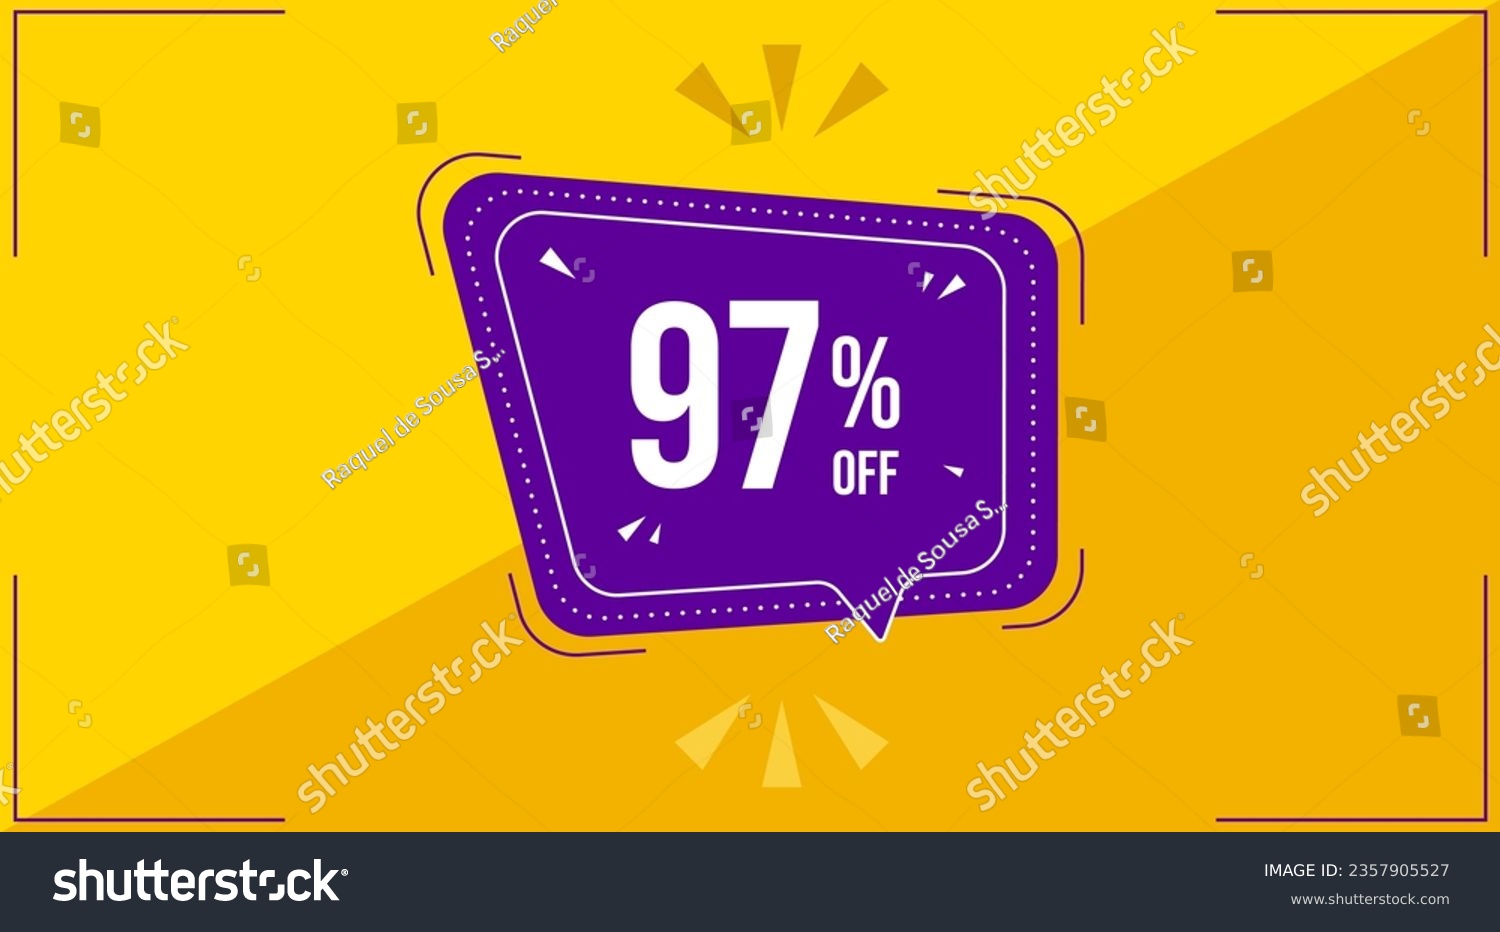 SVG of 97 percent, ninety seven percent. Discount banner shape. Sale coupon purple bubble icon. Special offer badge. Yellow abstract background. Modern concept design. Banner with offer badge. Vector svg